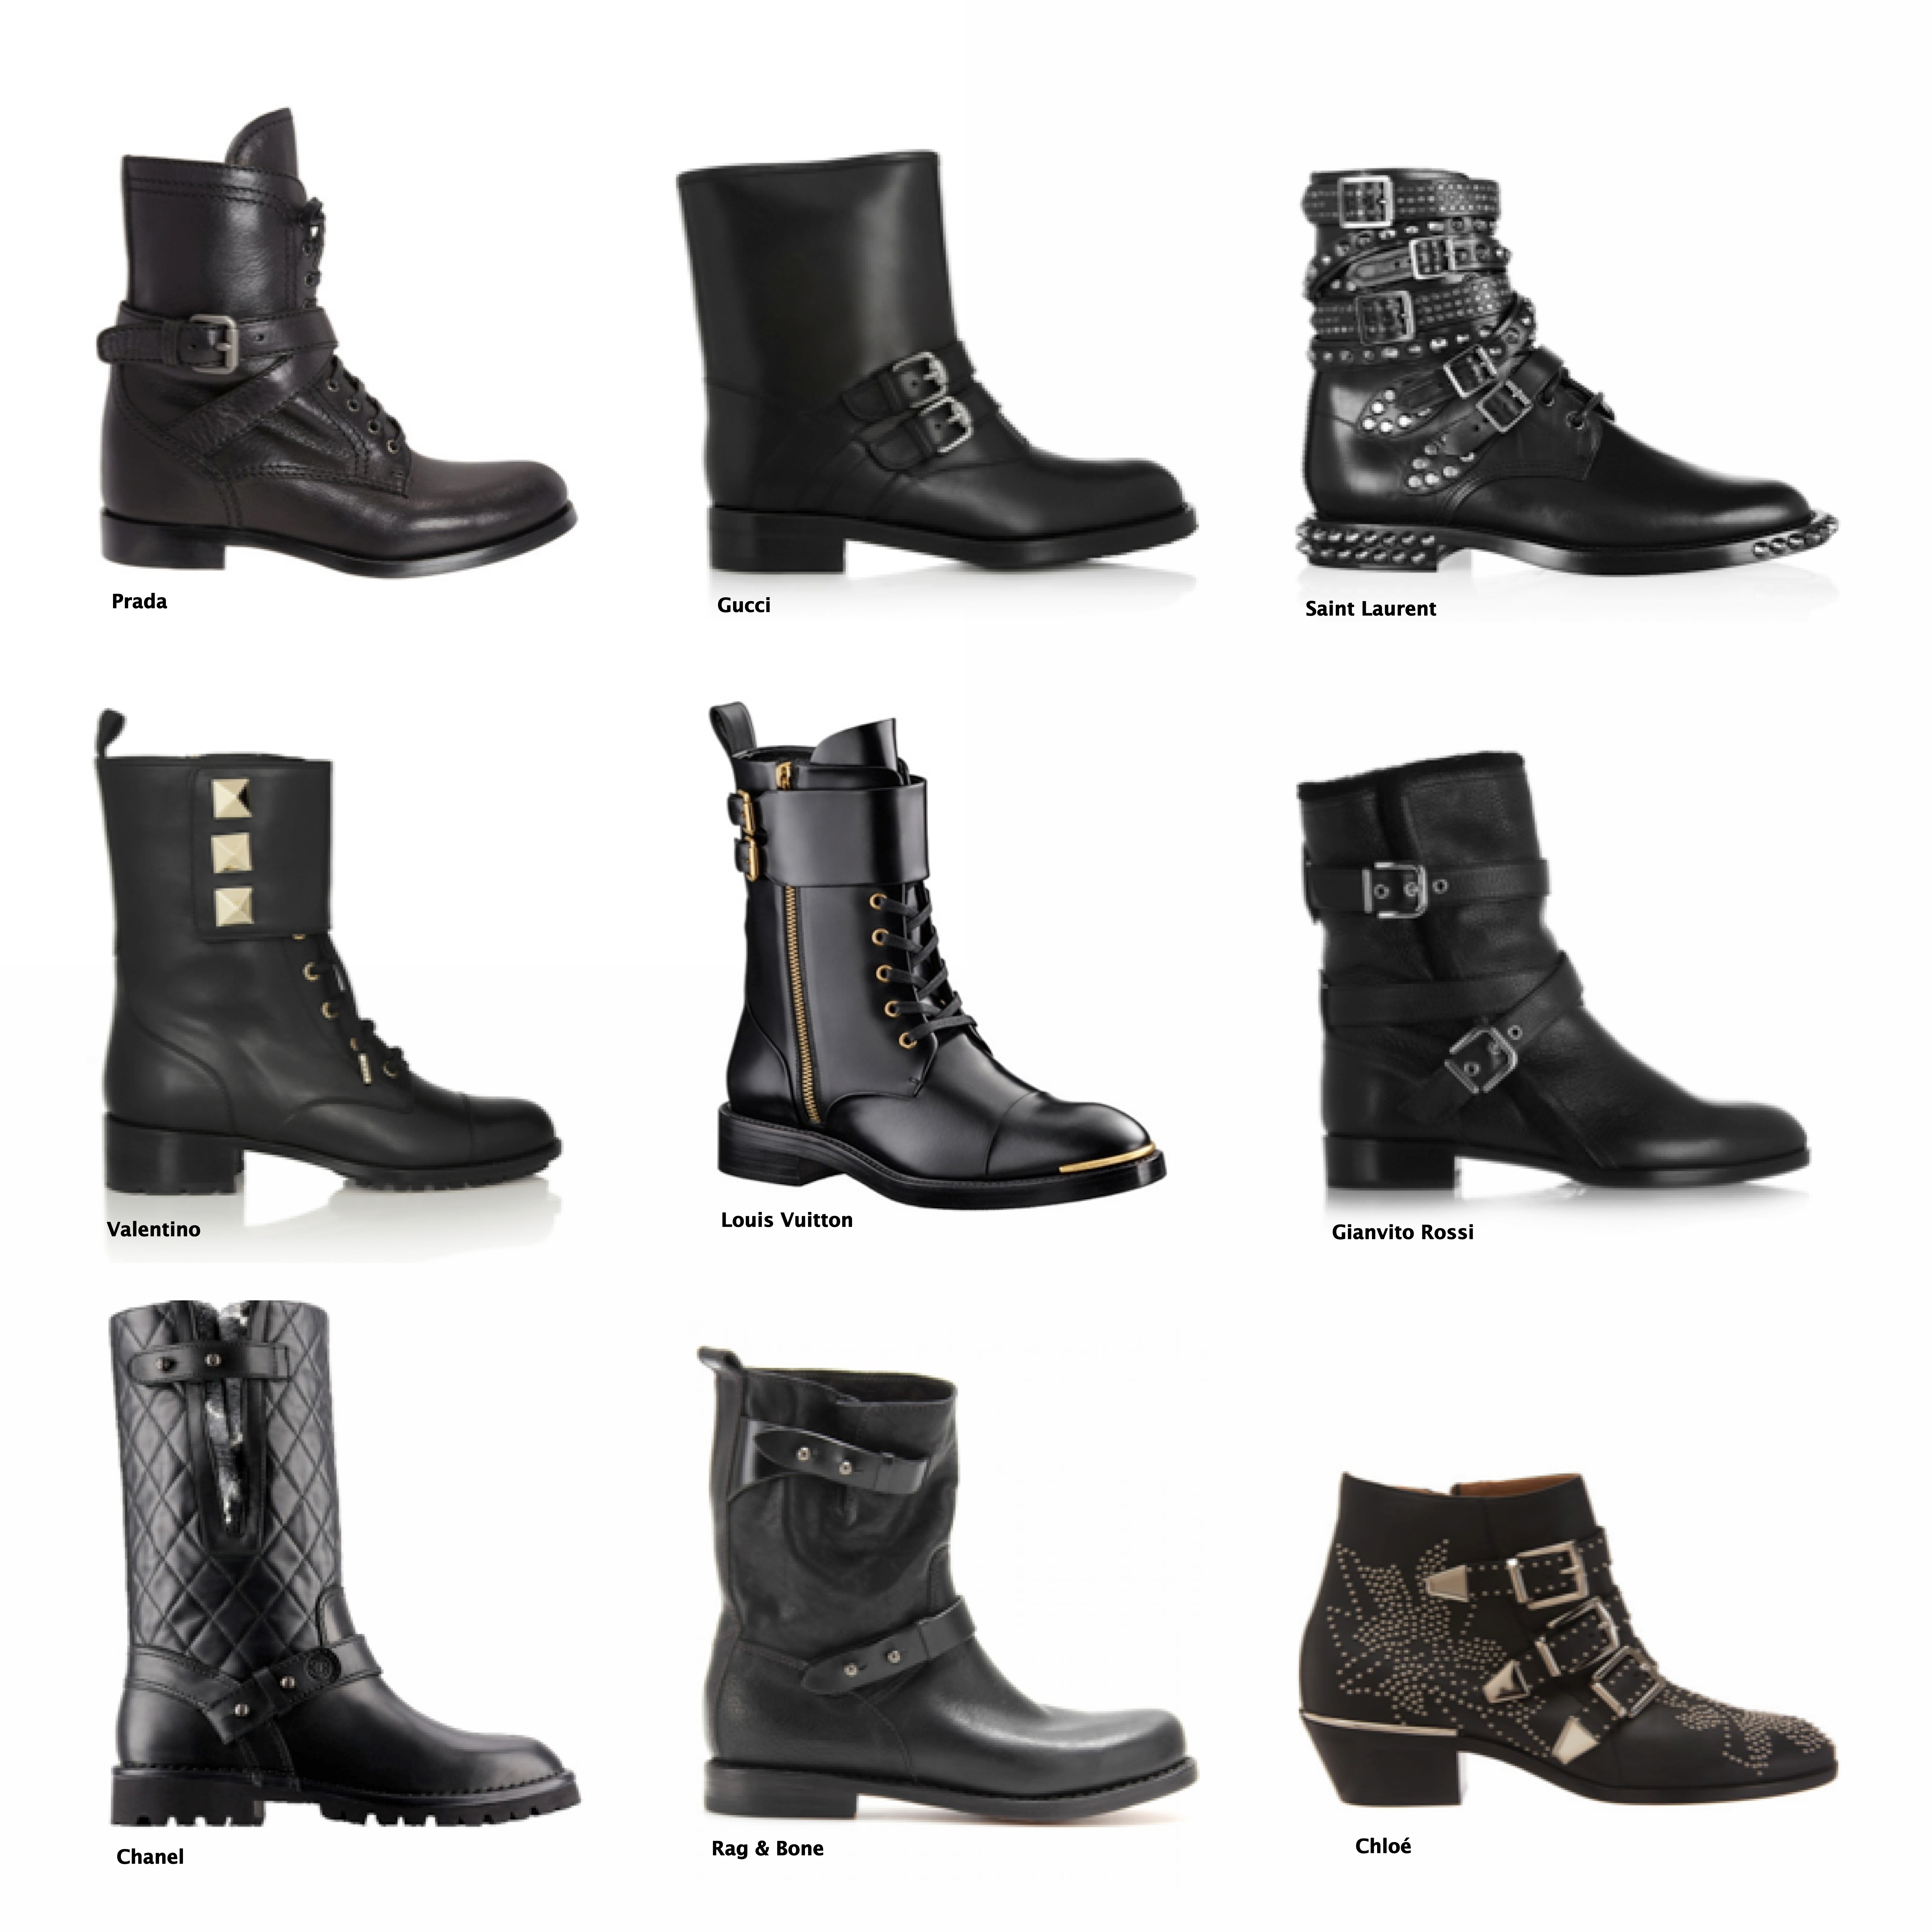 FALL TREND REPORT : BIKER STYLE – PART 2 “THE BOOTS”